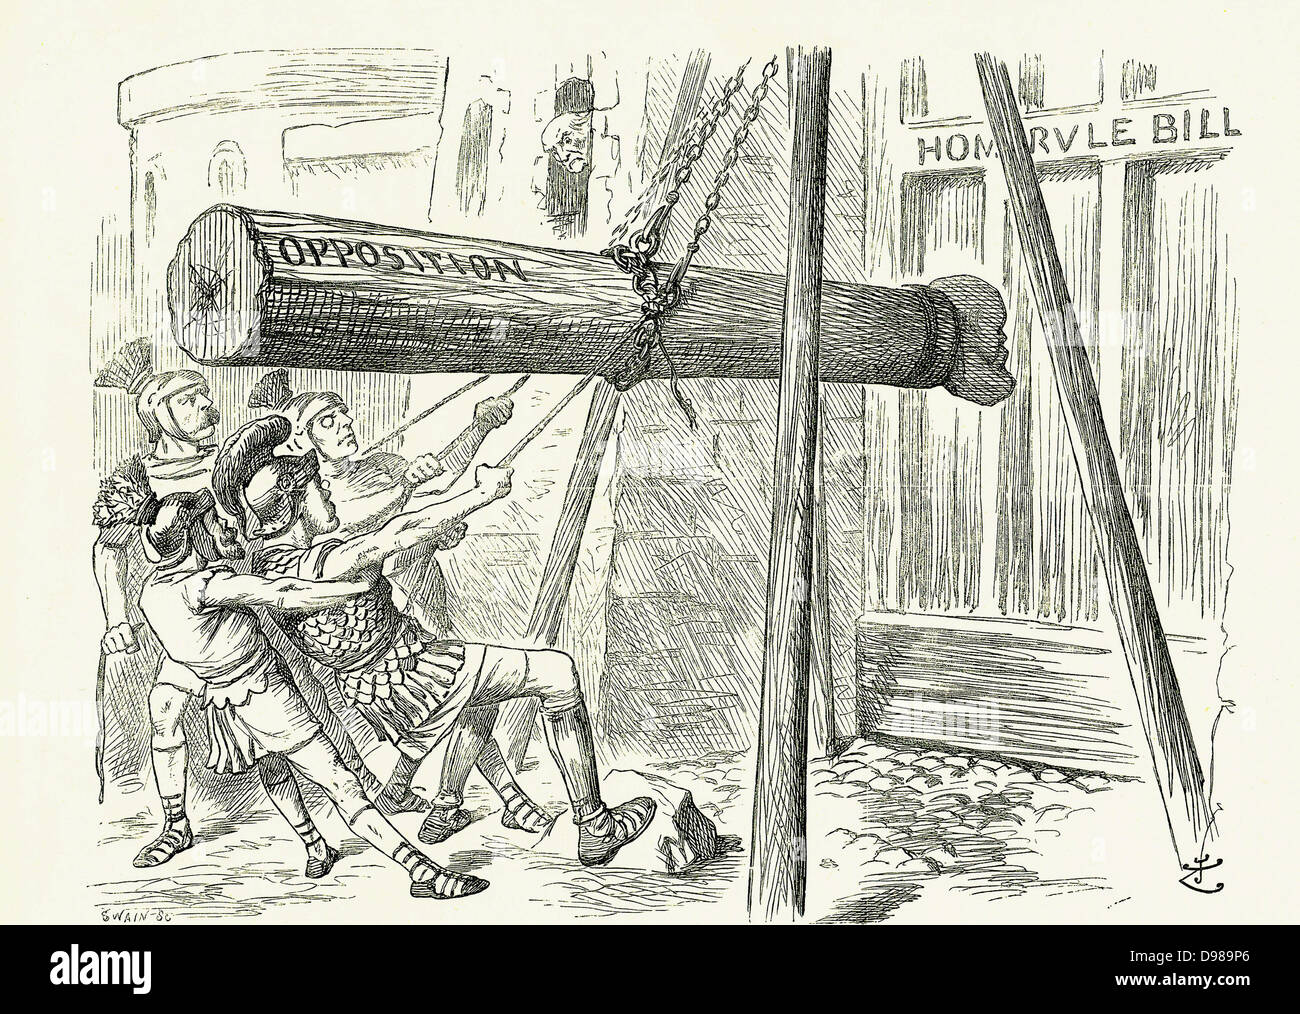 The Assault': Gladstone's Liberal Home Rule Bill under attack from the Conservative opposition attack by the battering ram with the head of the leader Lord Salisbury. John Tenniel cartoon from 'Punch', London, 18 March 1893. Stock Photo